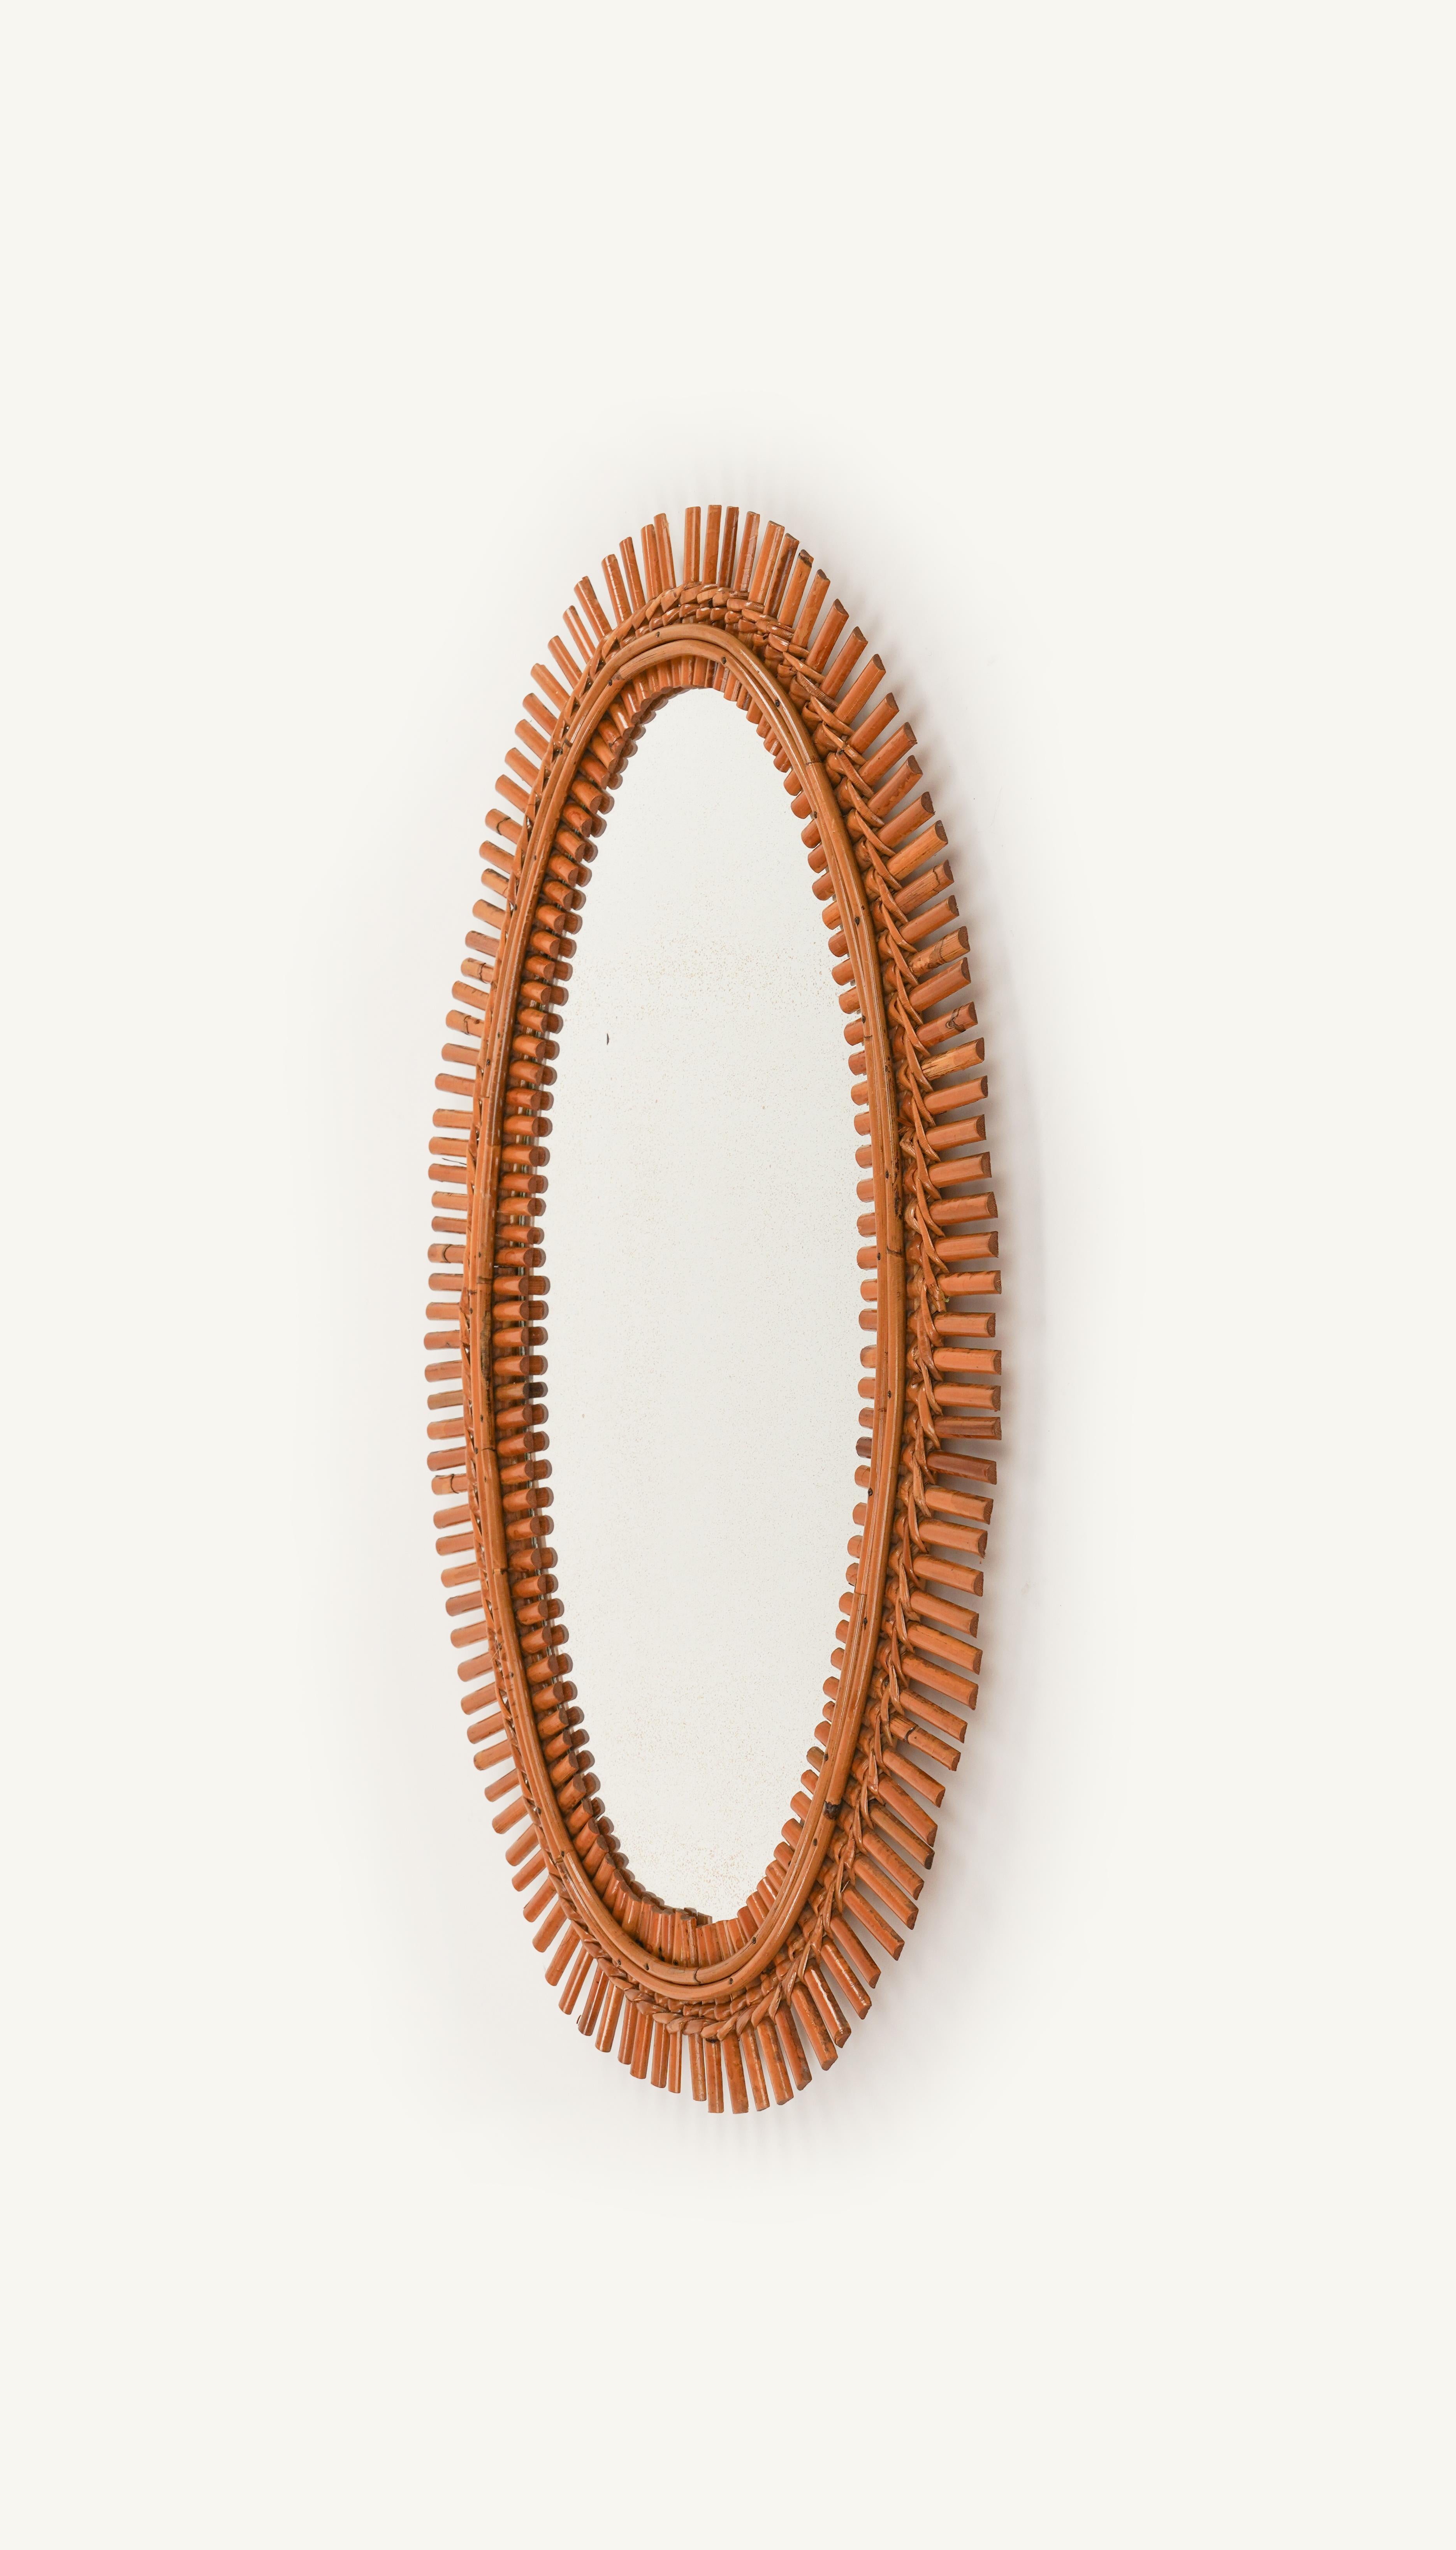 Italian Midcentury Rattan and Bamboo Oval Wall Mirror, Italy 1960s For Sale